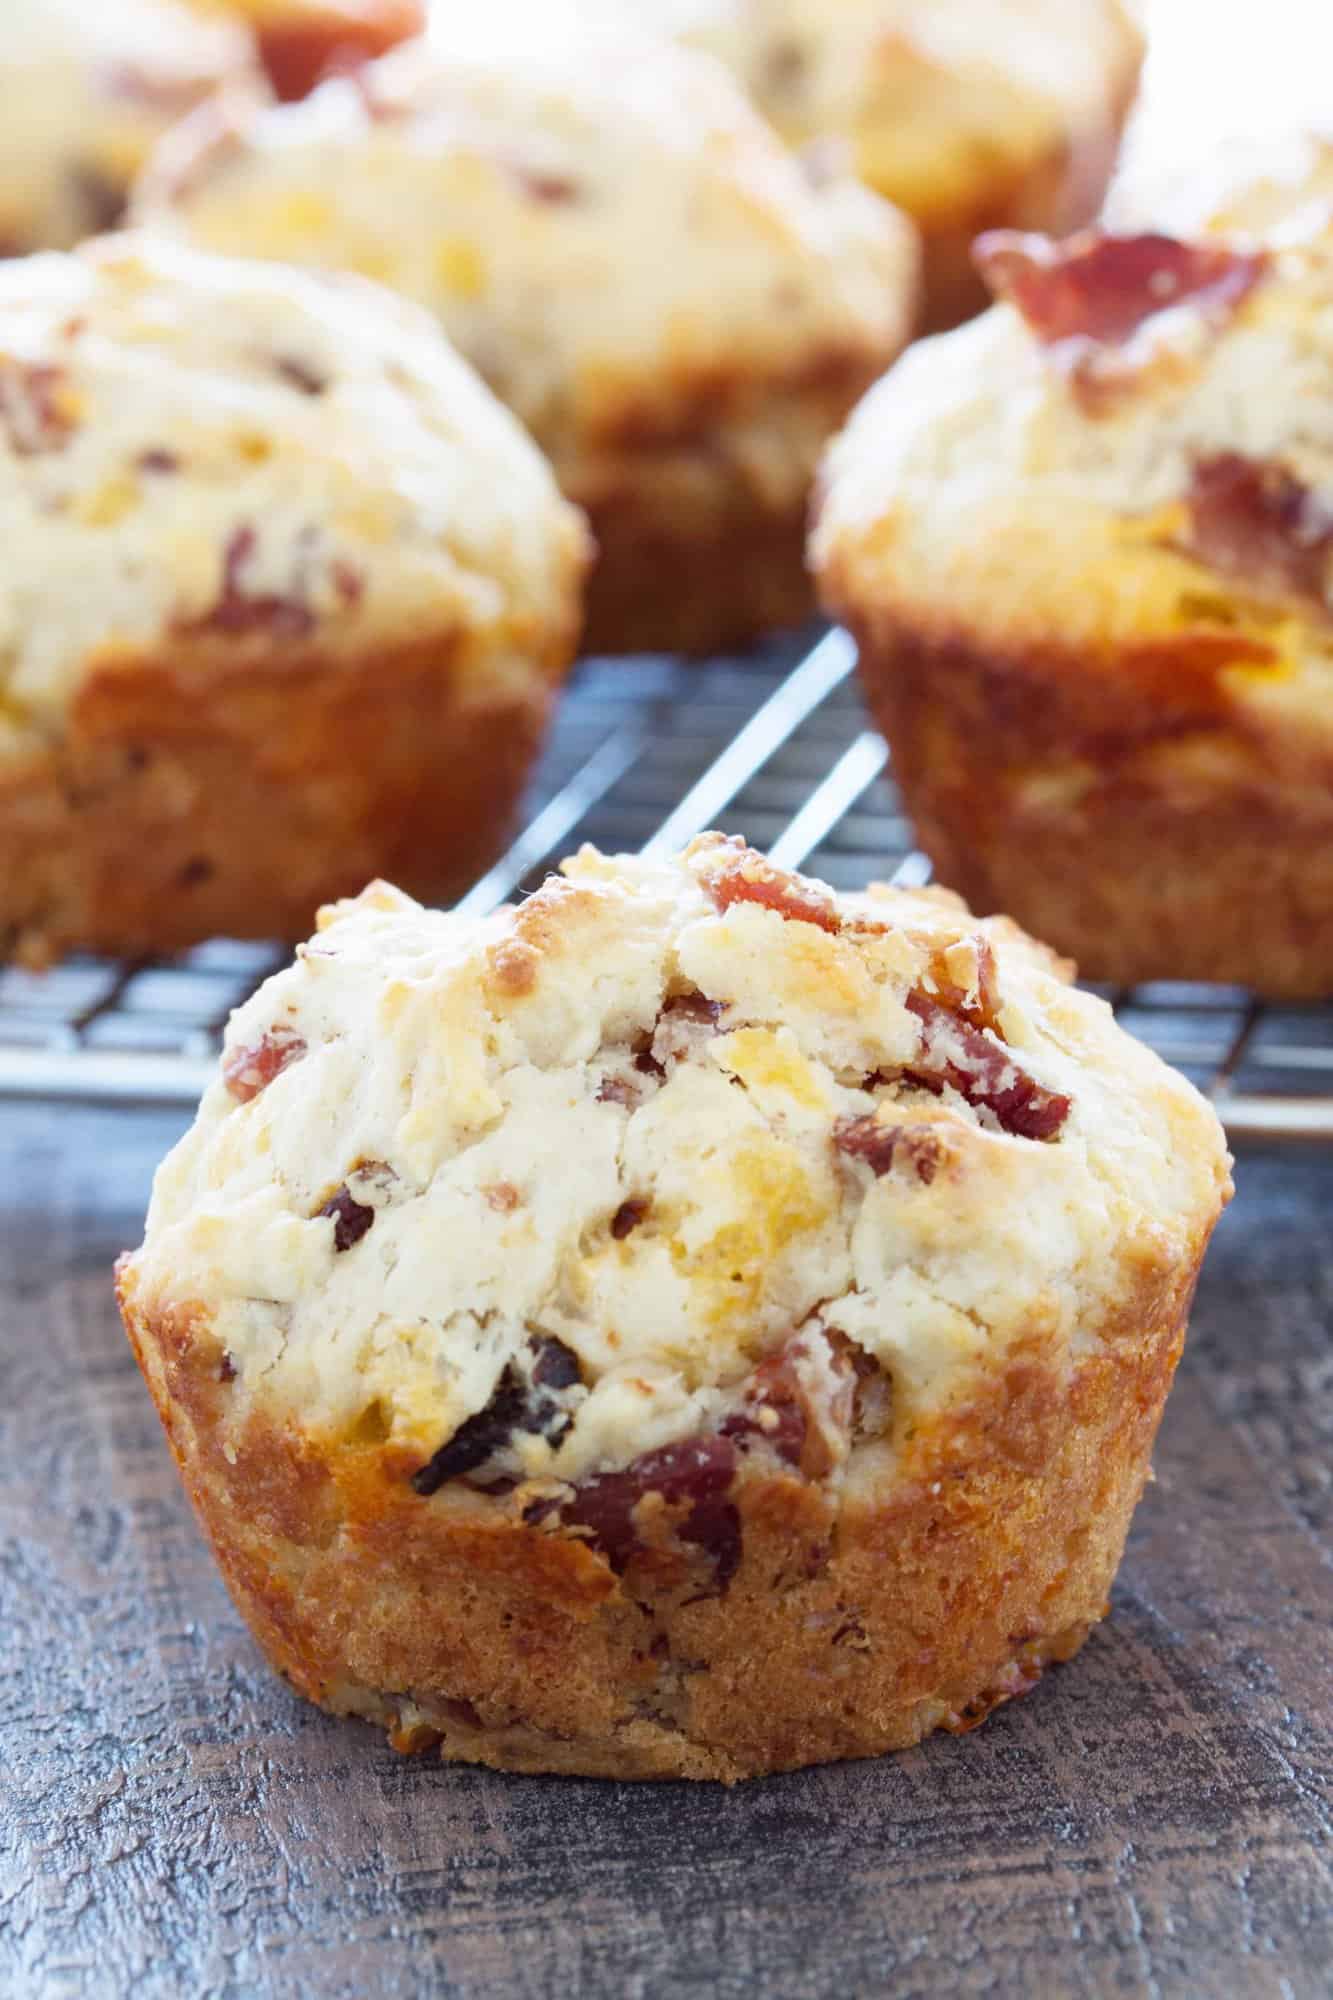 Savory Bacon Cheddar Muffins are the perfect on-the-go breakfast item. It’s a hearty, moist, and deliciously savory muffin that you’ll be happy to wake up to every day!